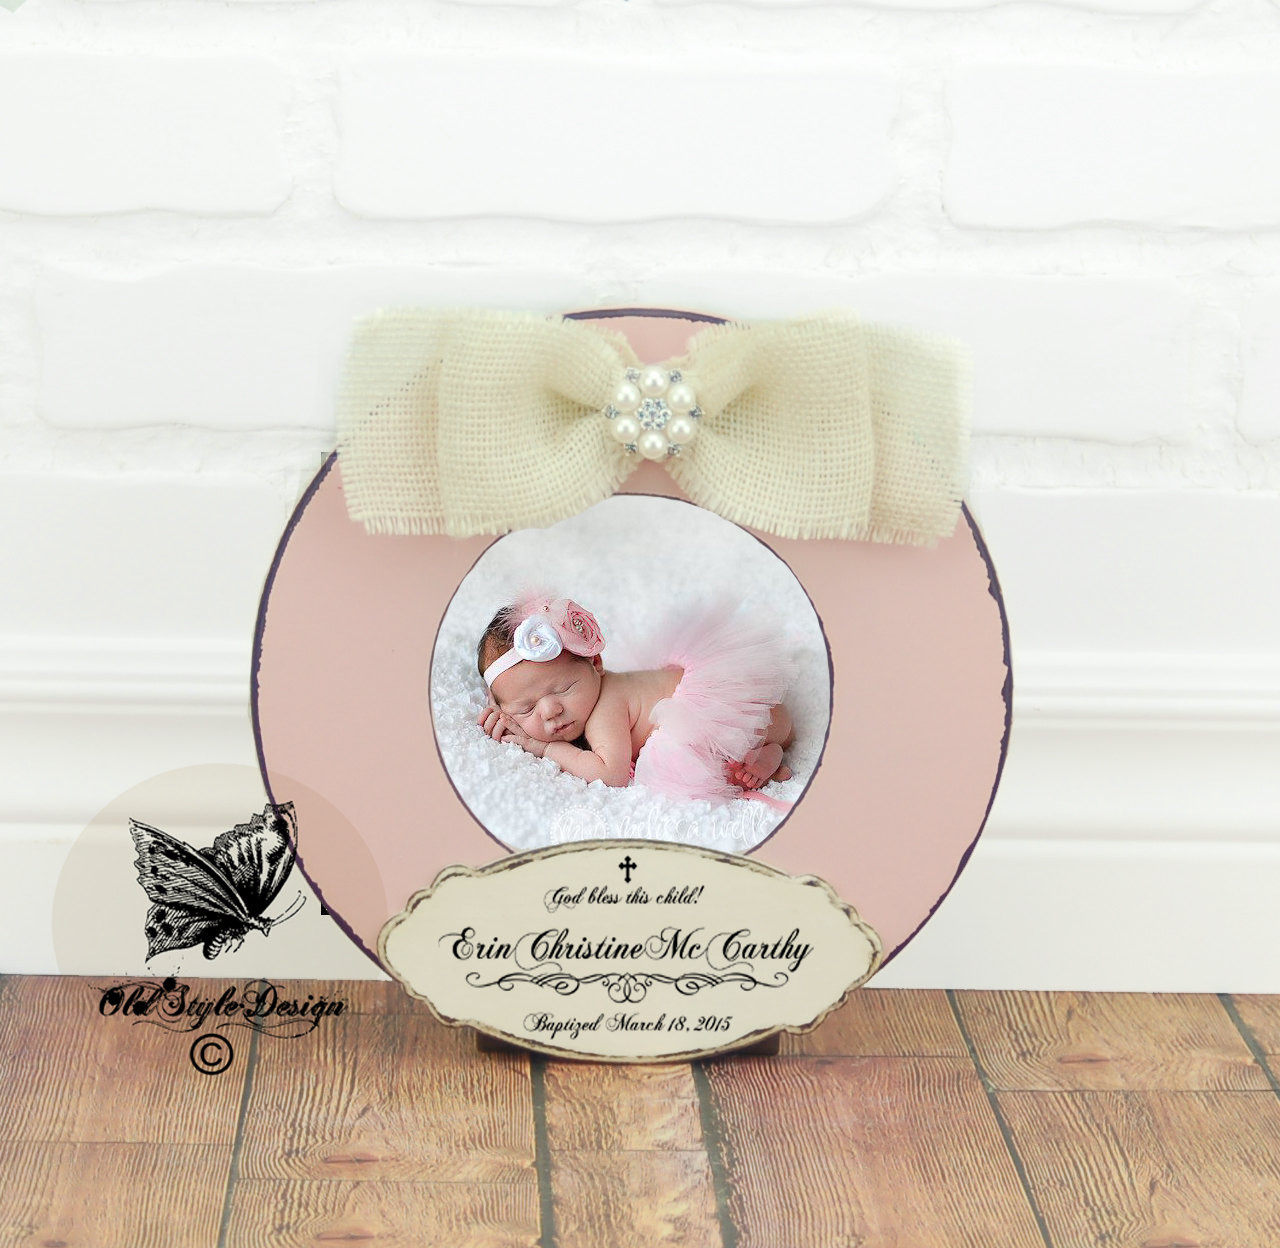 Gift Ideas For Baptism Baby Girl
 Baptism Gift GIRL Christening Gift Girl Personalized picture